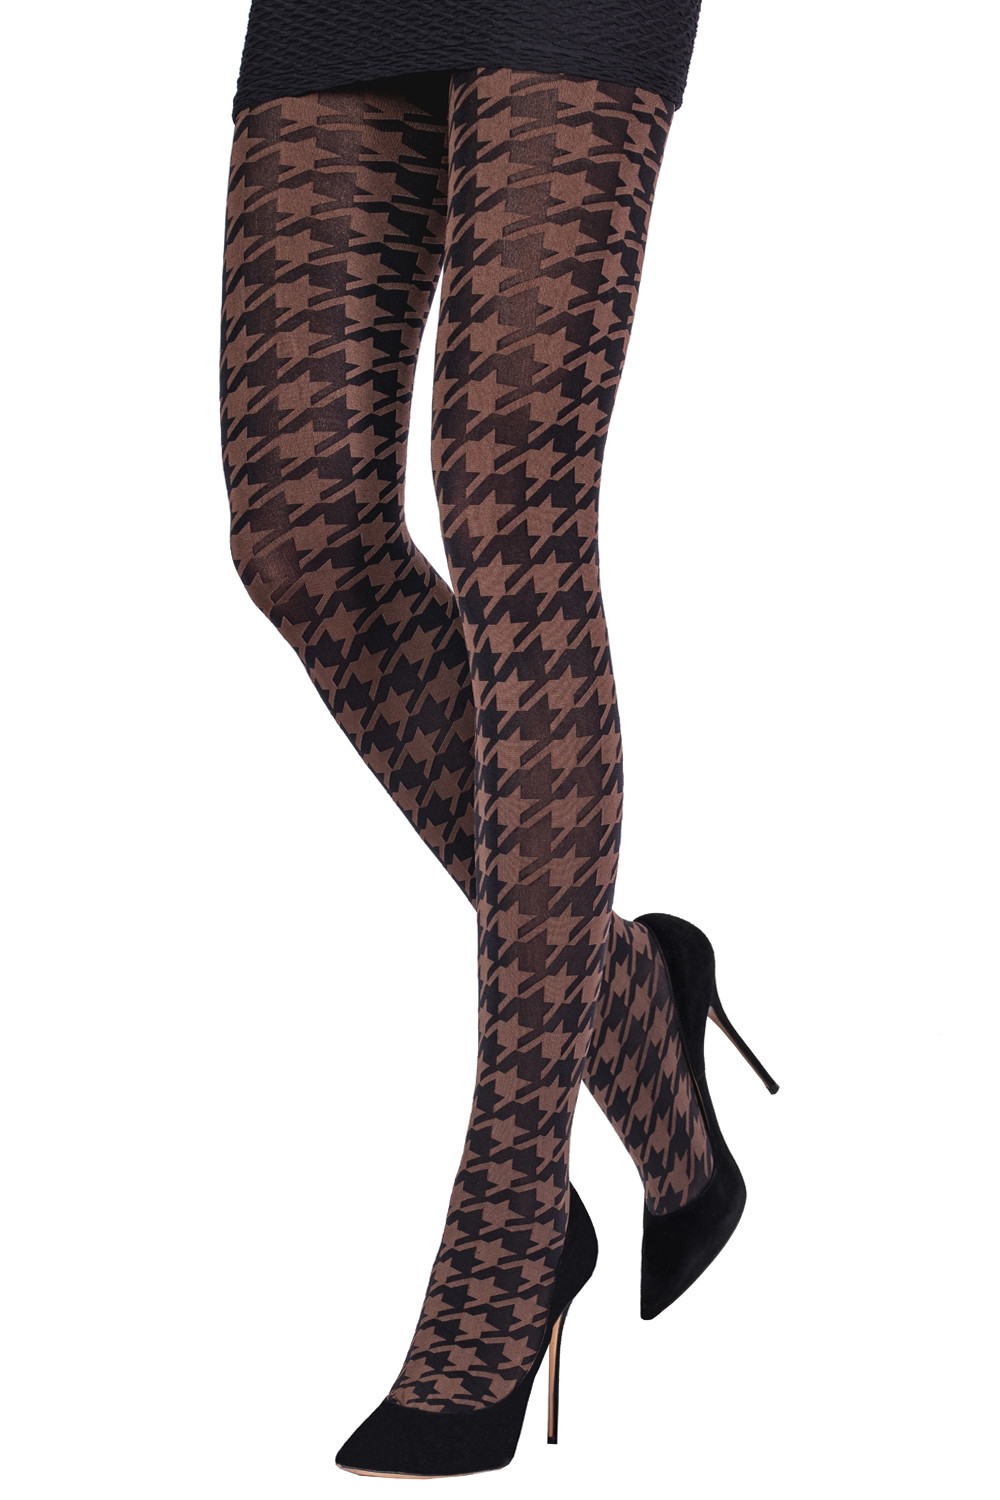 Calzedonia Houndstooth 30 Denier Sheer Tights Woman Stripes Size Xs/S